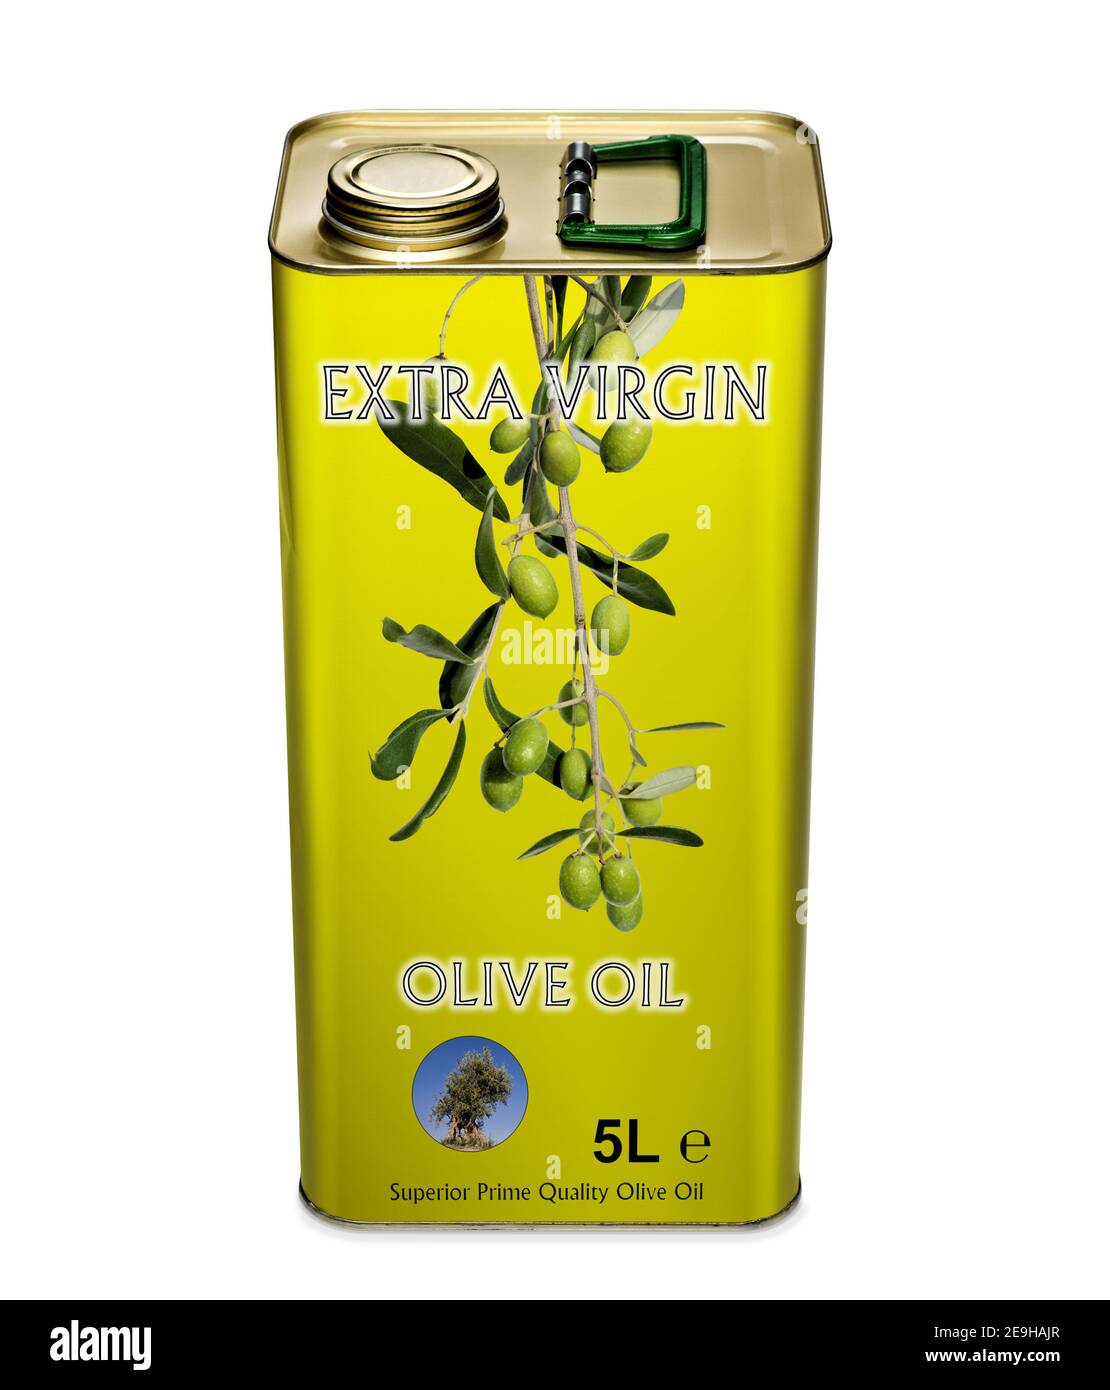 Fictive virgin olives olive oil brand in 5l food tin can container canister packaging Stock Photo